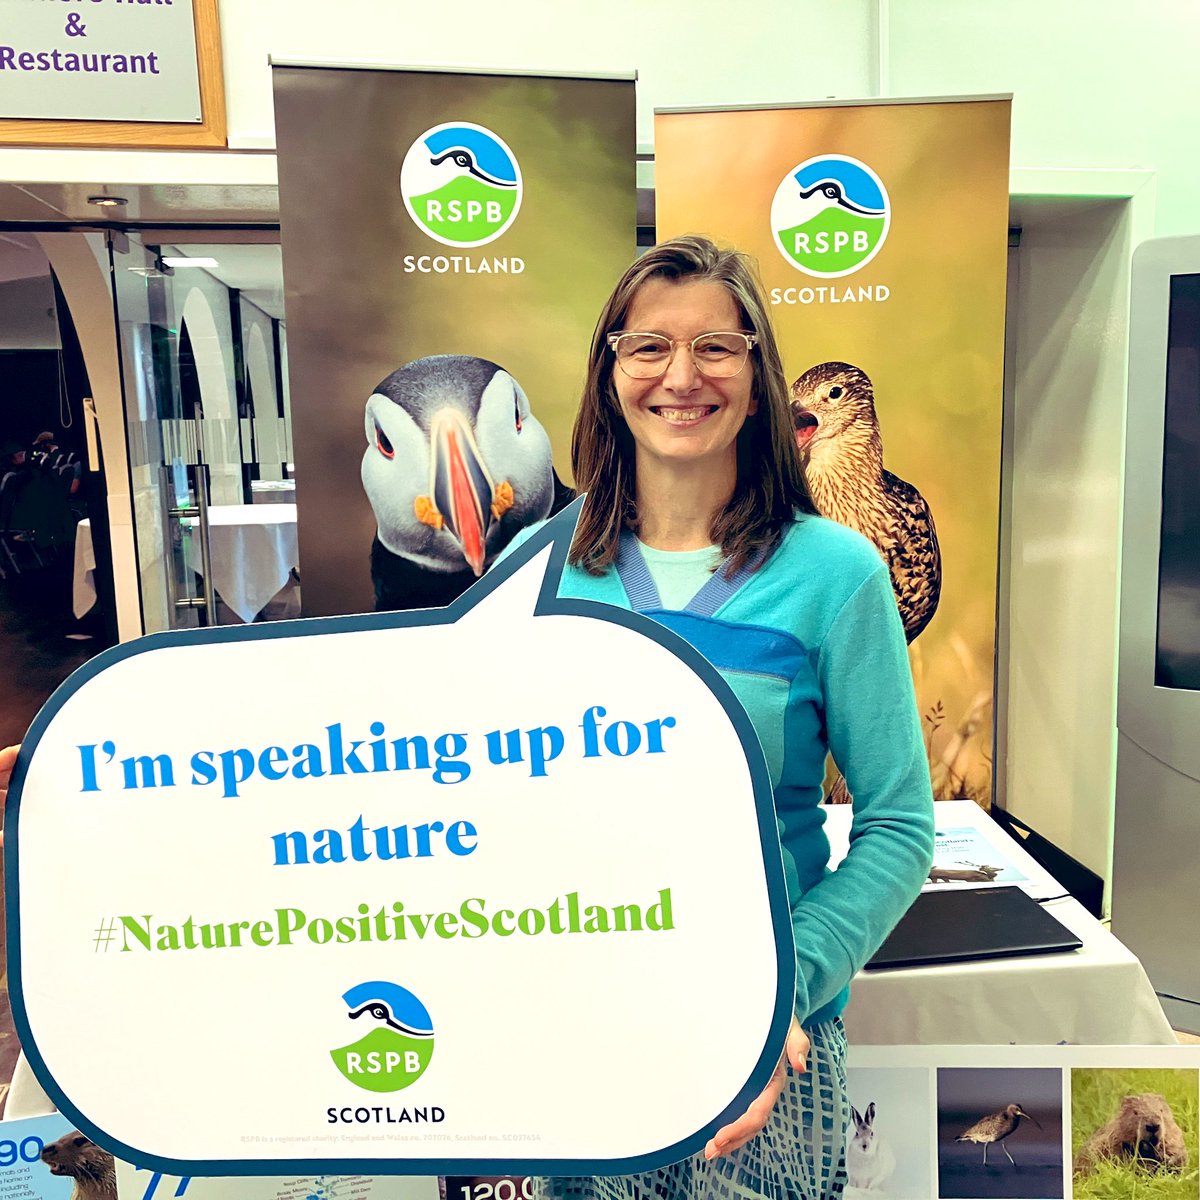 🐦Great to see @RSPBScotland at #SGPconf !

#NaturePositiveScotland